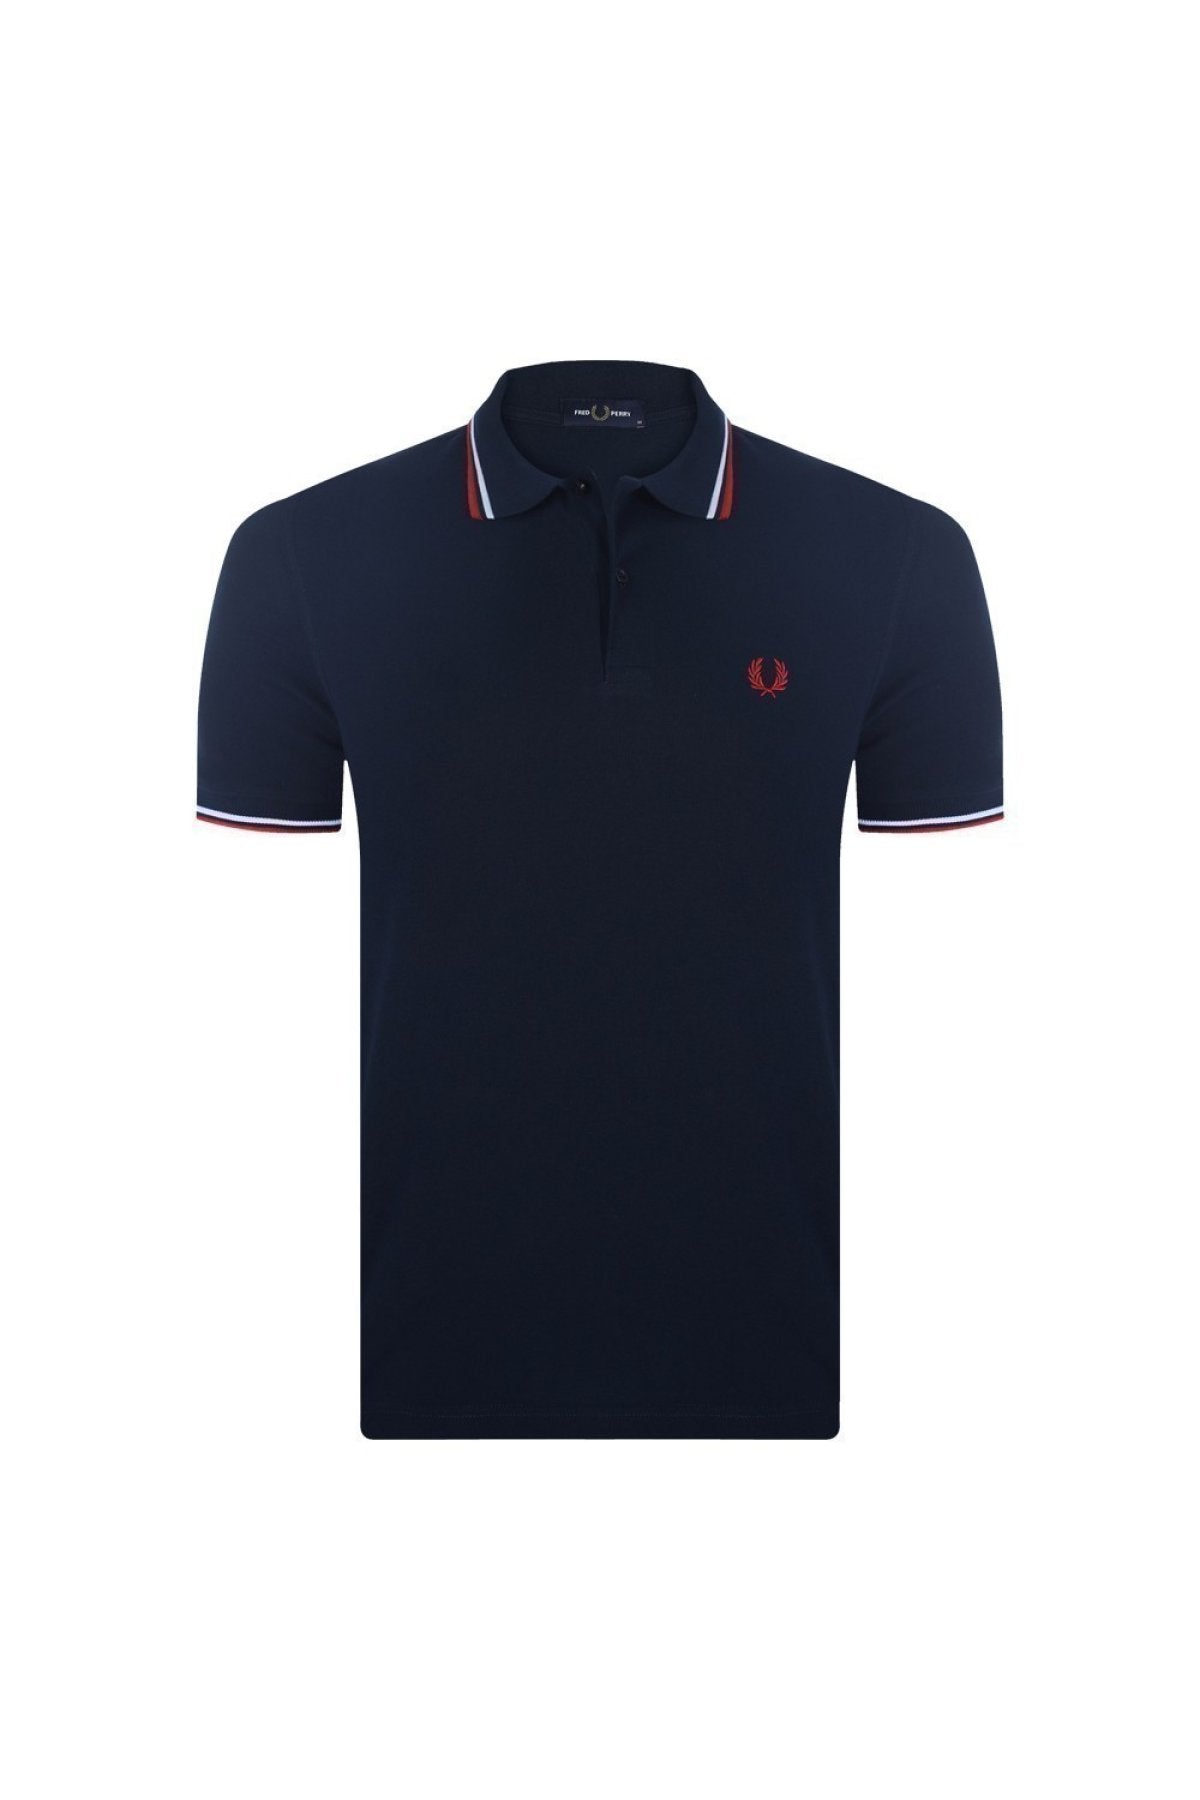 Fred perry M2100